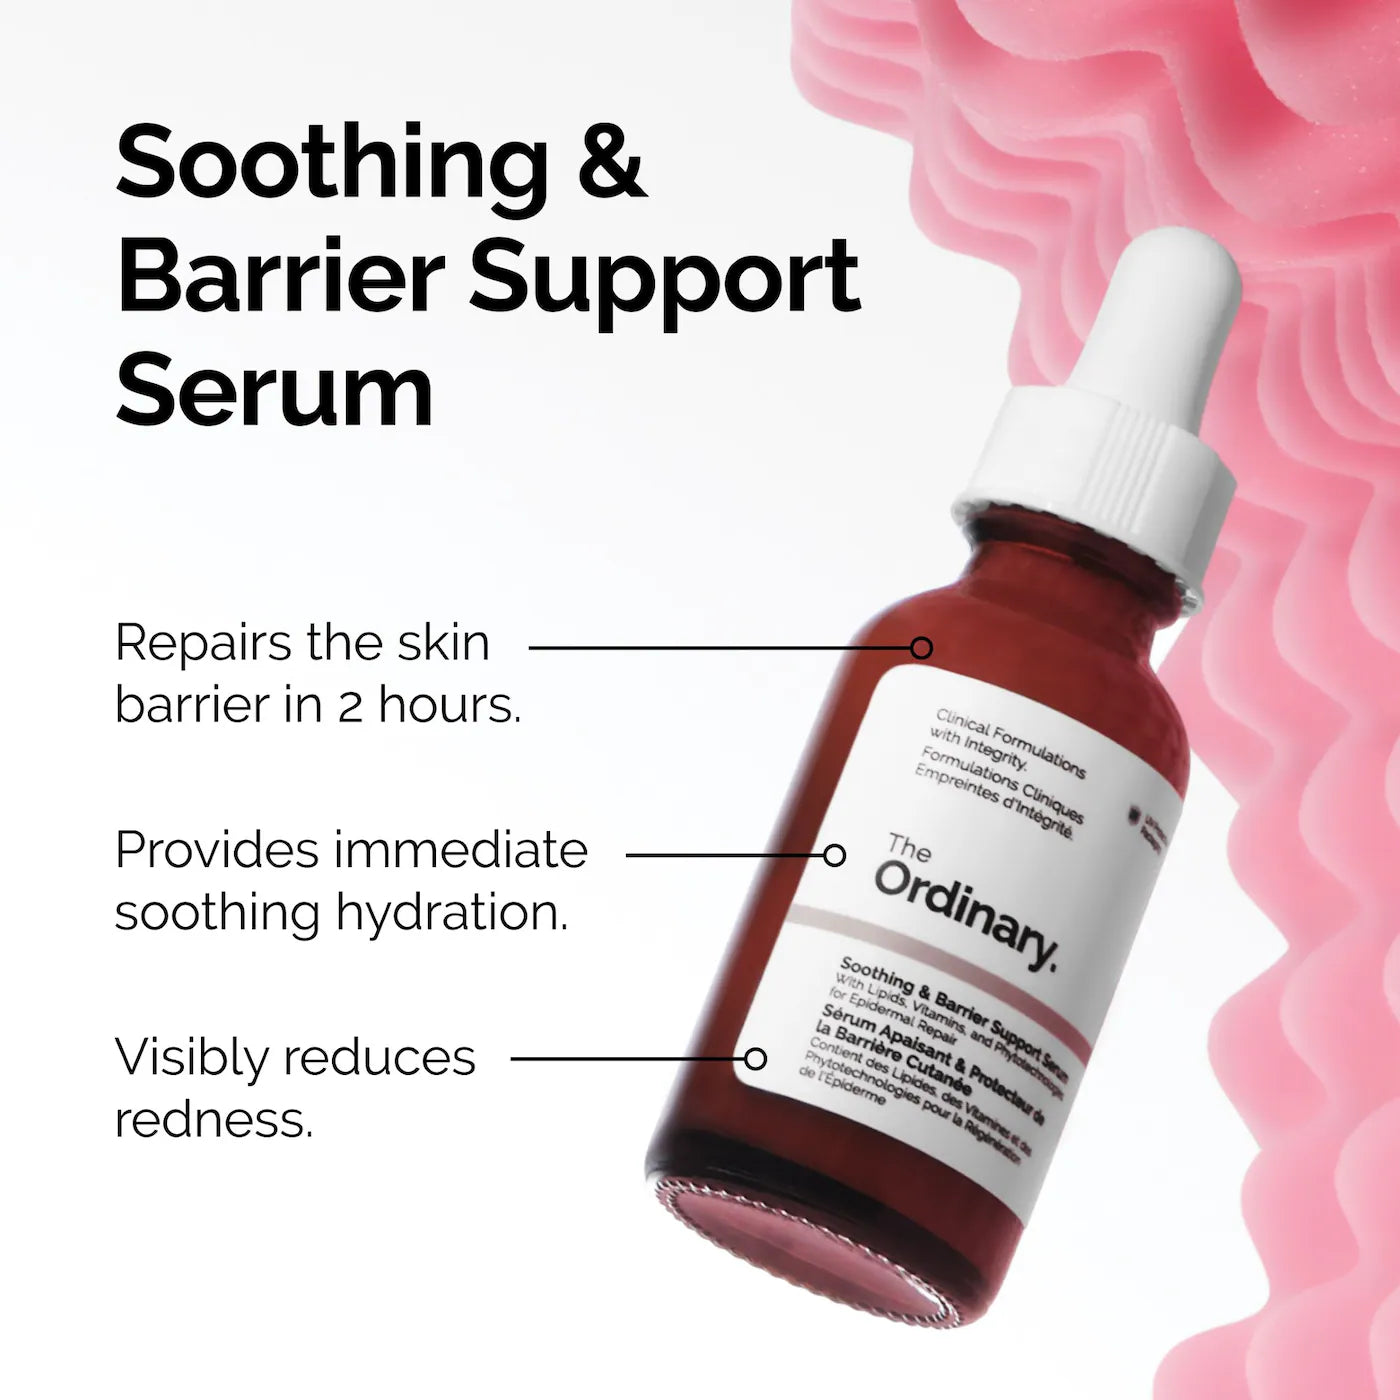 Soothing & Barrier Support Serum | THE ORDINARY